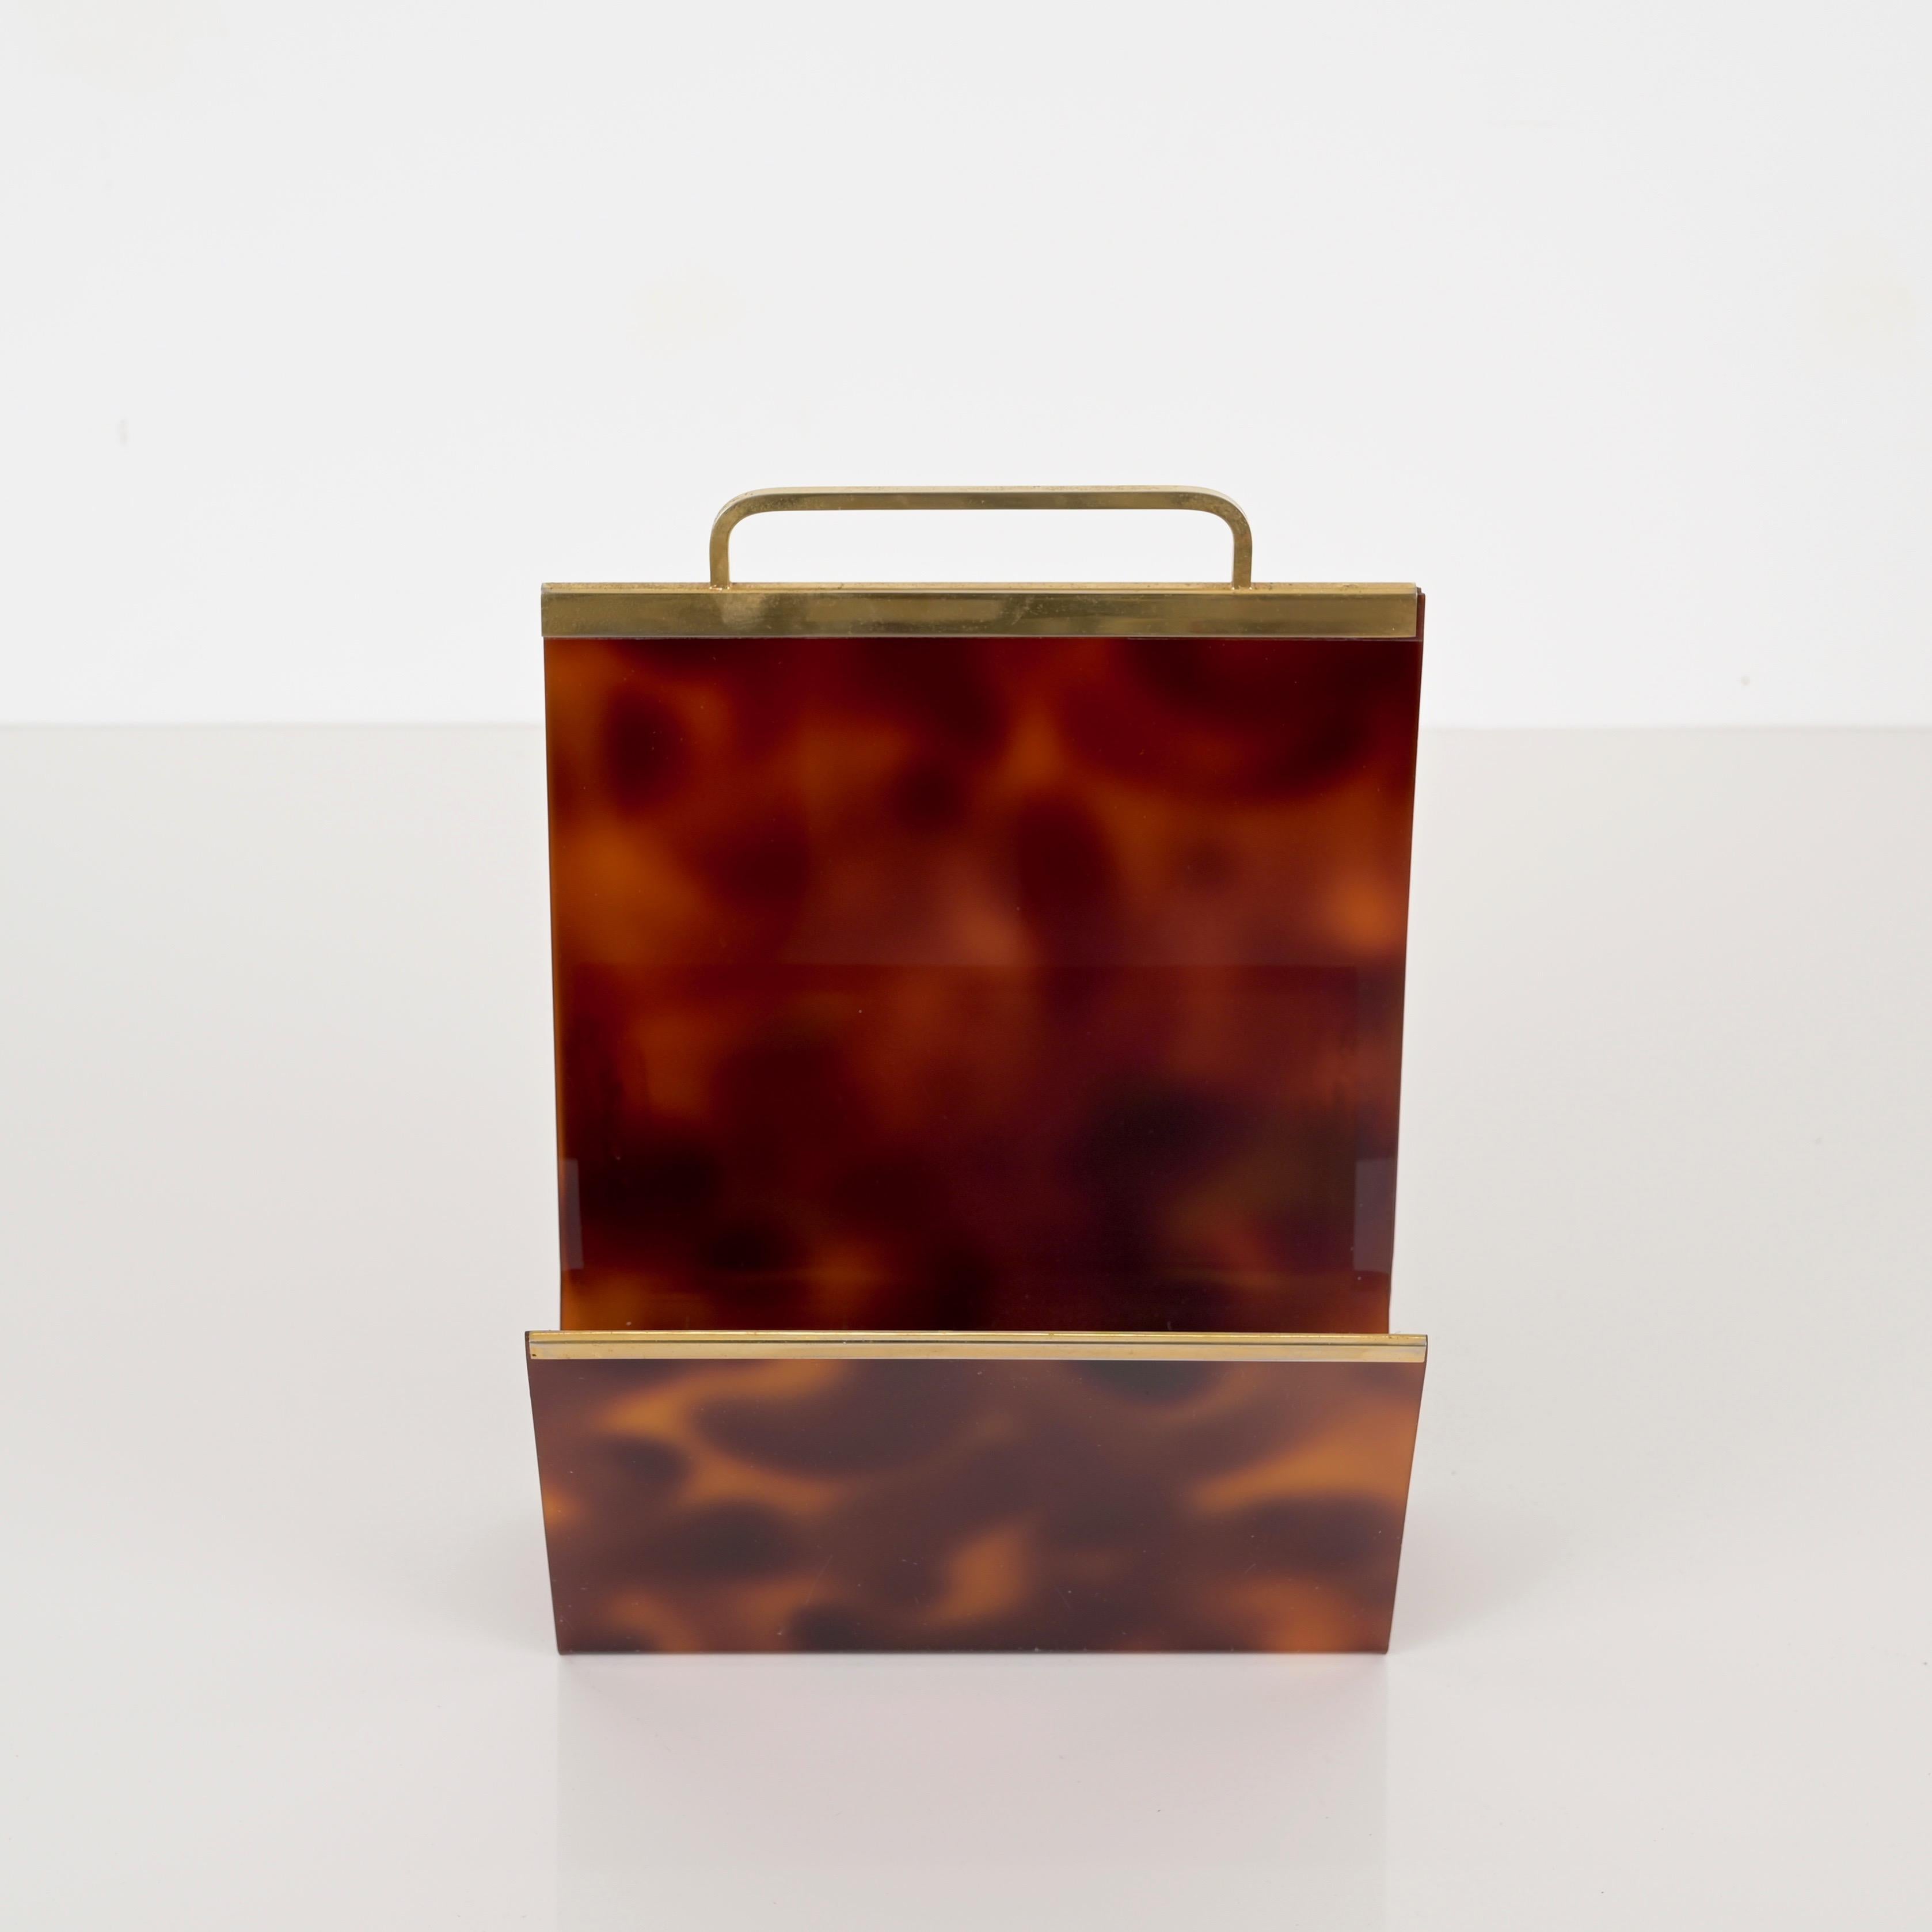 Alpac Midcentury Tortoiseshell Lucite and Brass Magazine Rack, Dior, France 1970 For Sale 3